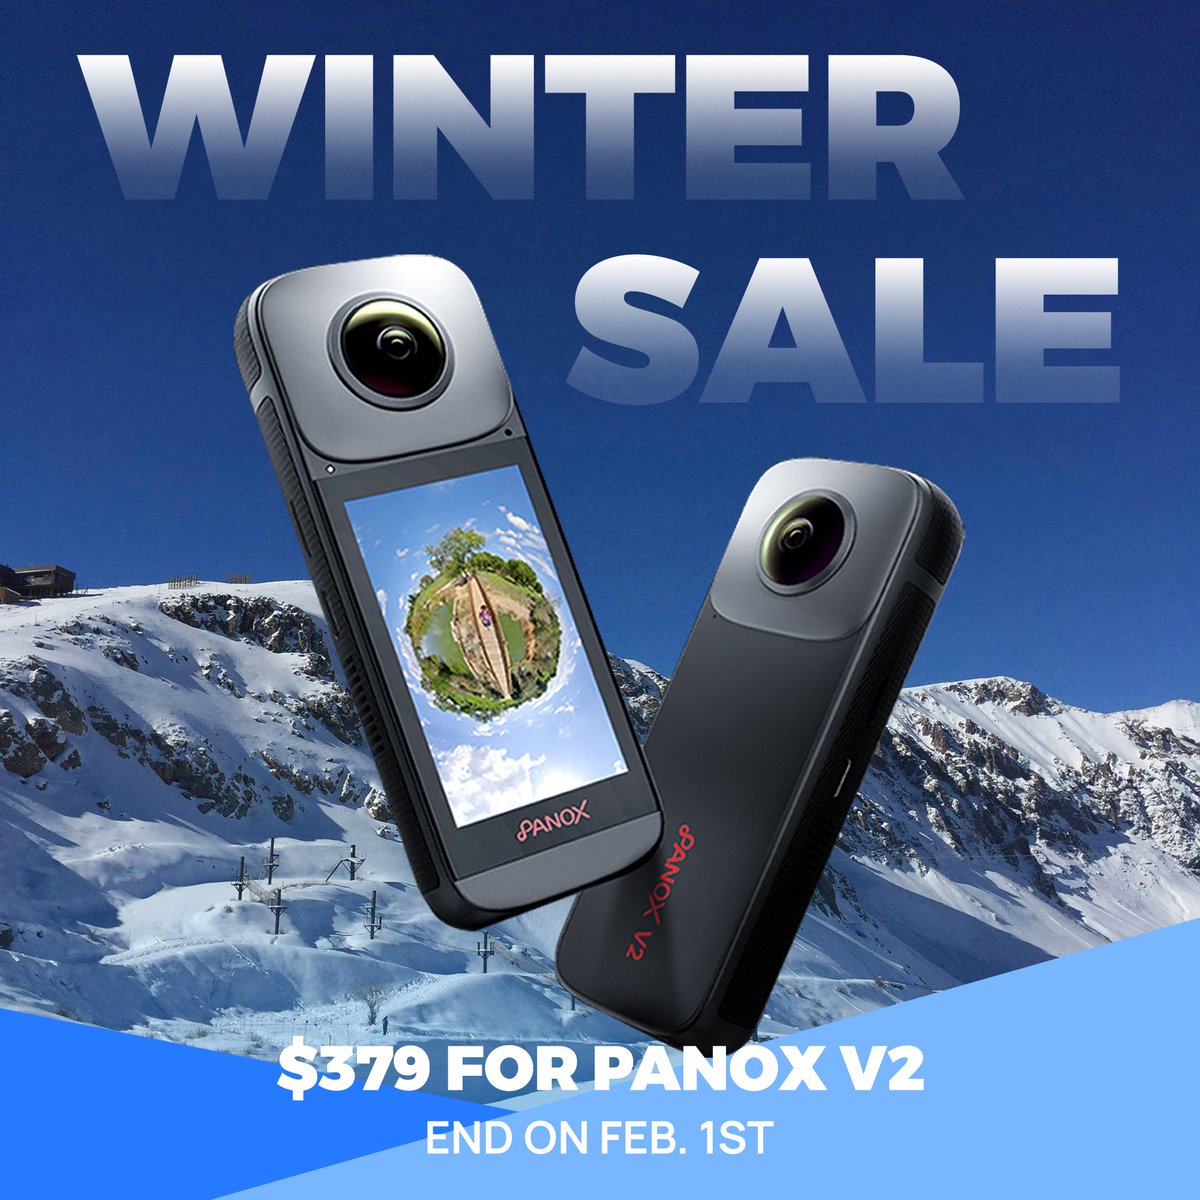 Chill out with hot deals! Winter sale is on. Limited time, maximum savings!! ❄️🔥 Winter Sale: bit.ly/45PQTXN #panoxv2 #wintersale #sale #promotion #deal